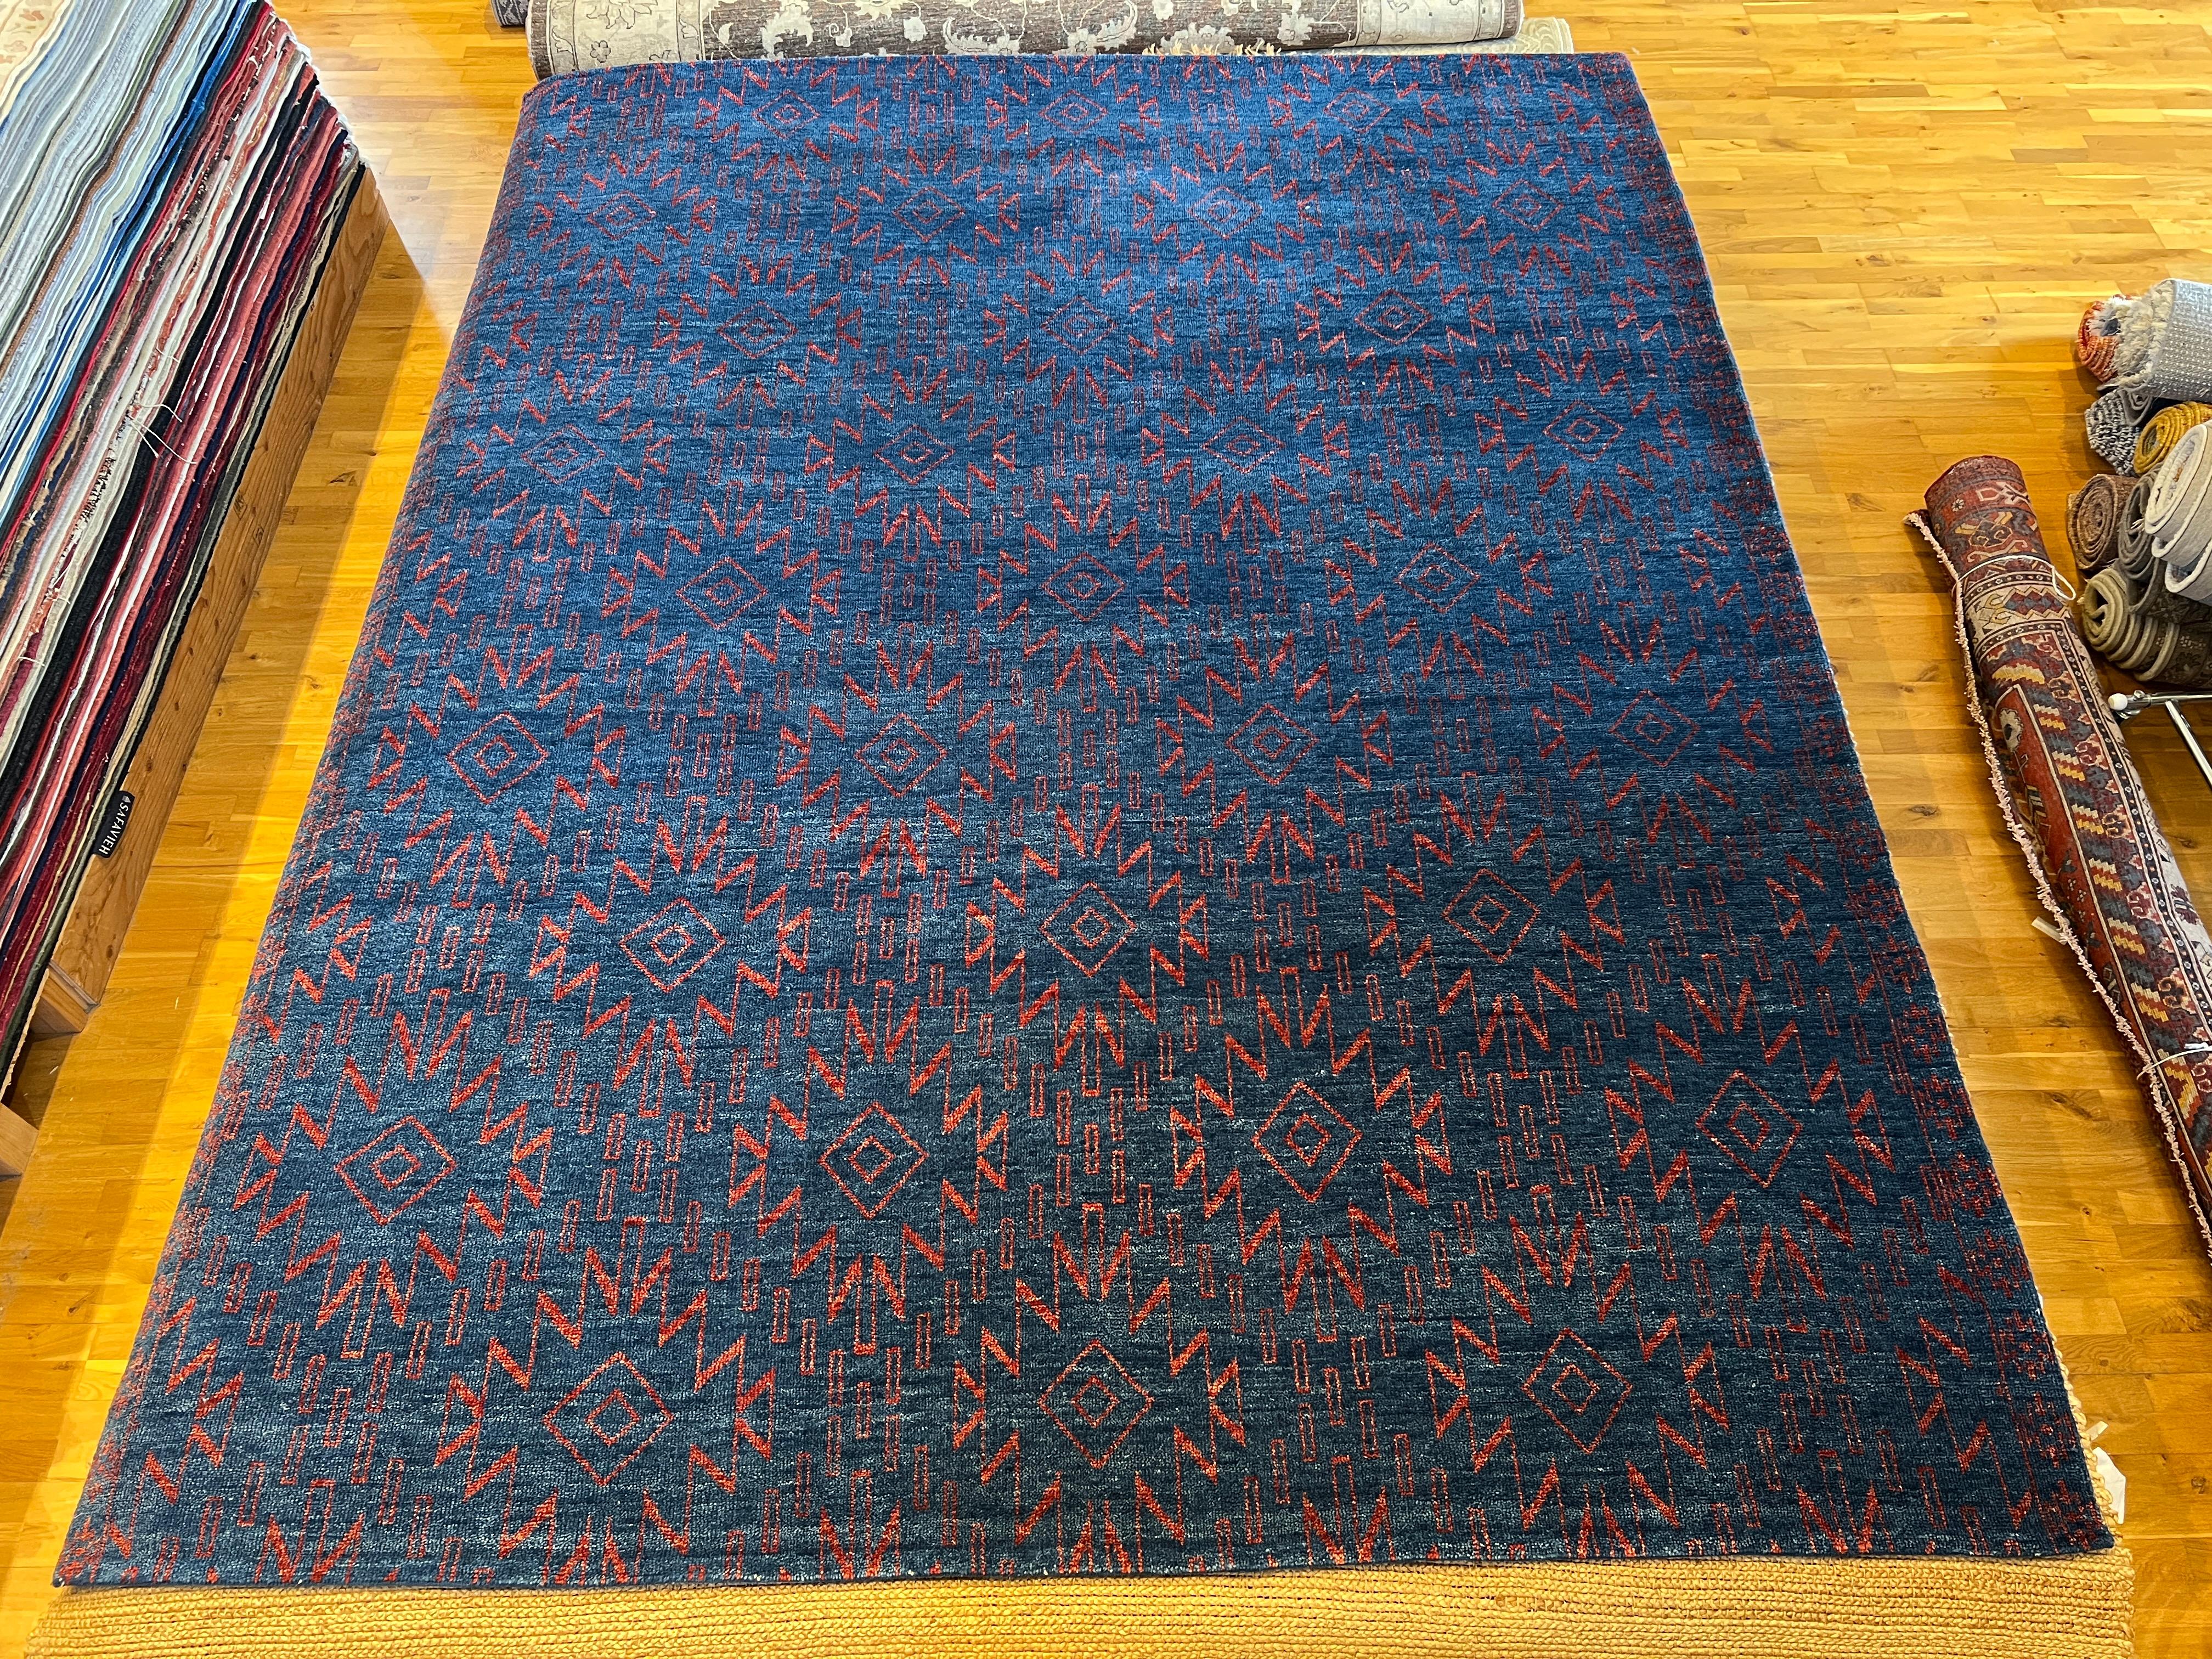 Add a touch of modern, tribal style to your home with our 9'x12' Moroccan rug. The vibrant blue background and red accent will make a statement in any room. Soft and durable, this rug is sure to liven up your space and provide warmth and comfort